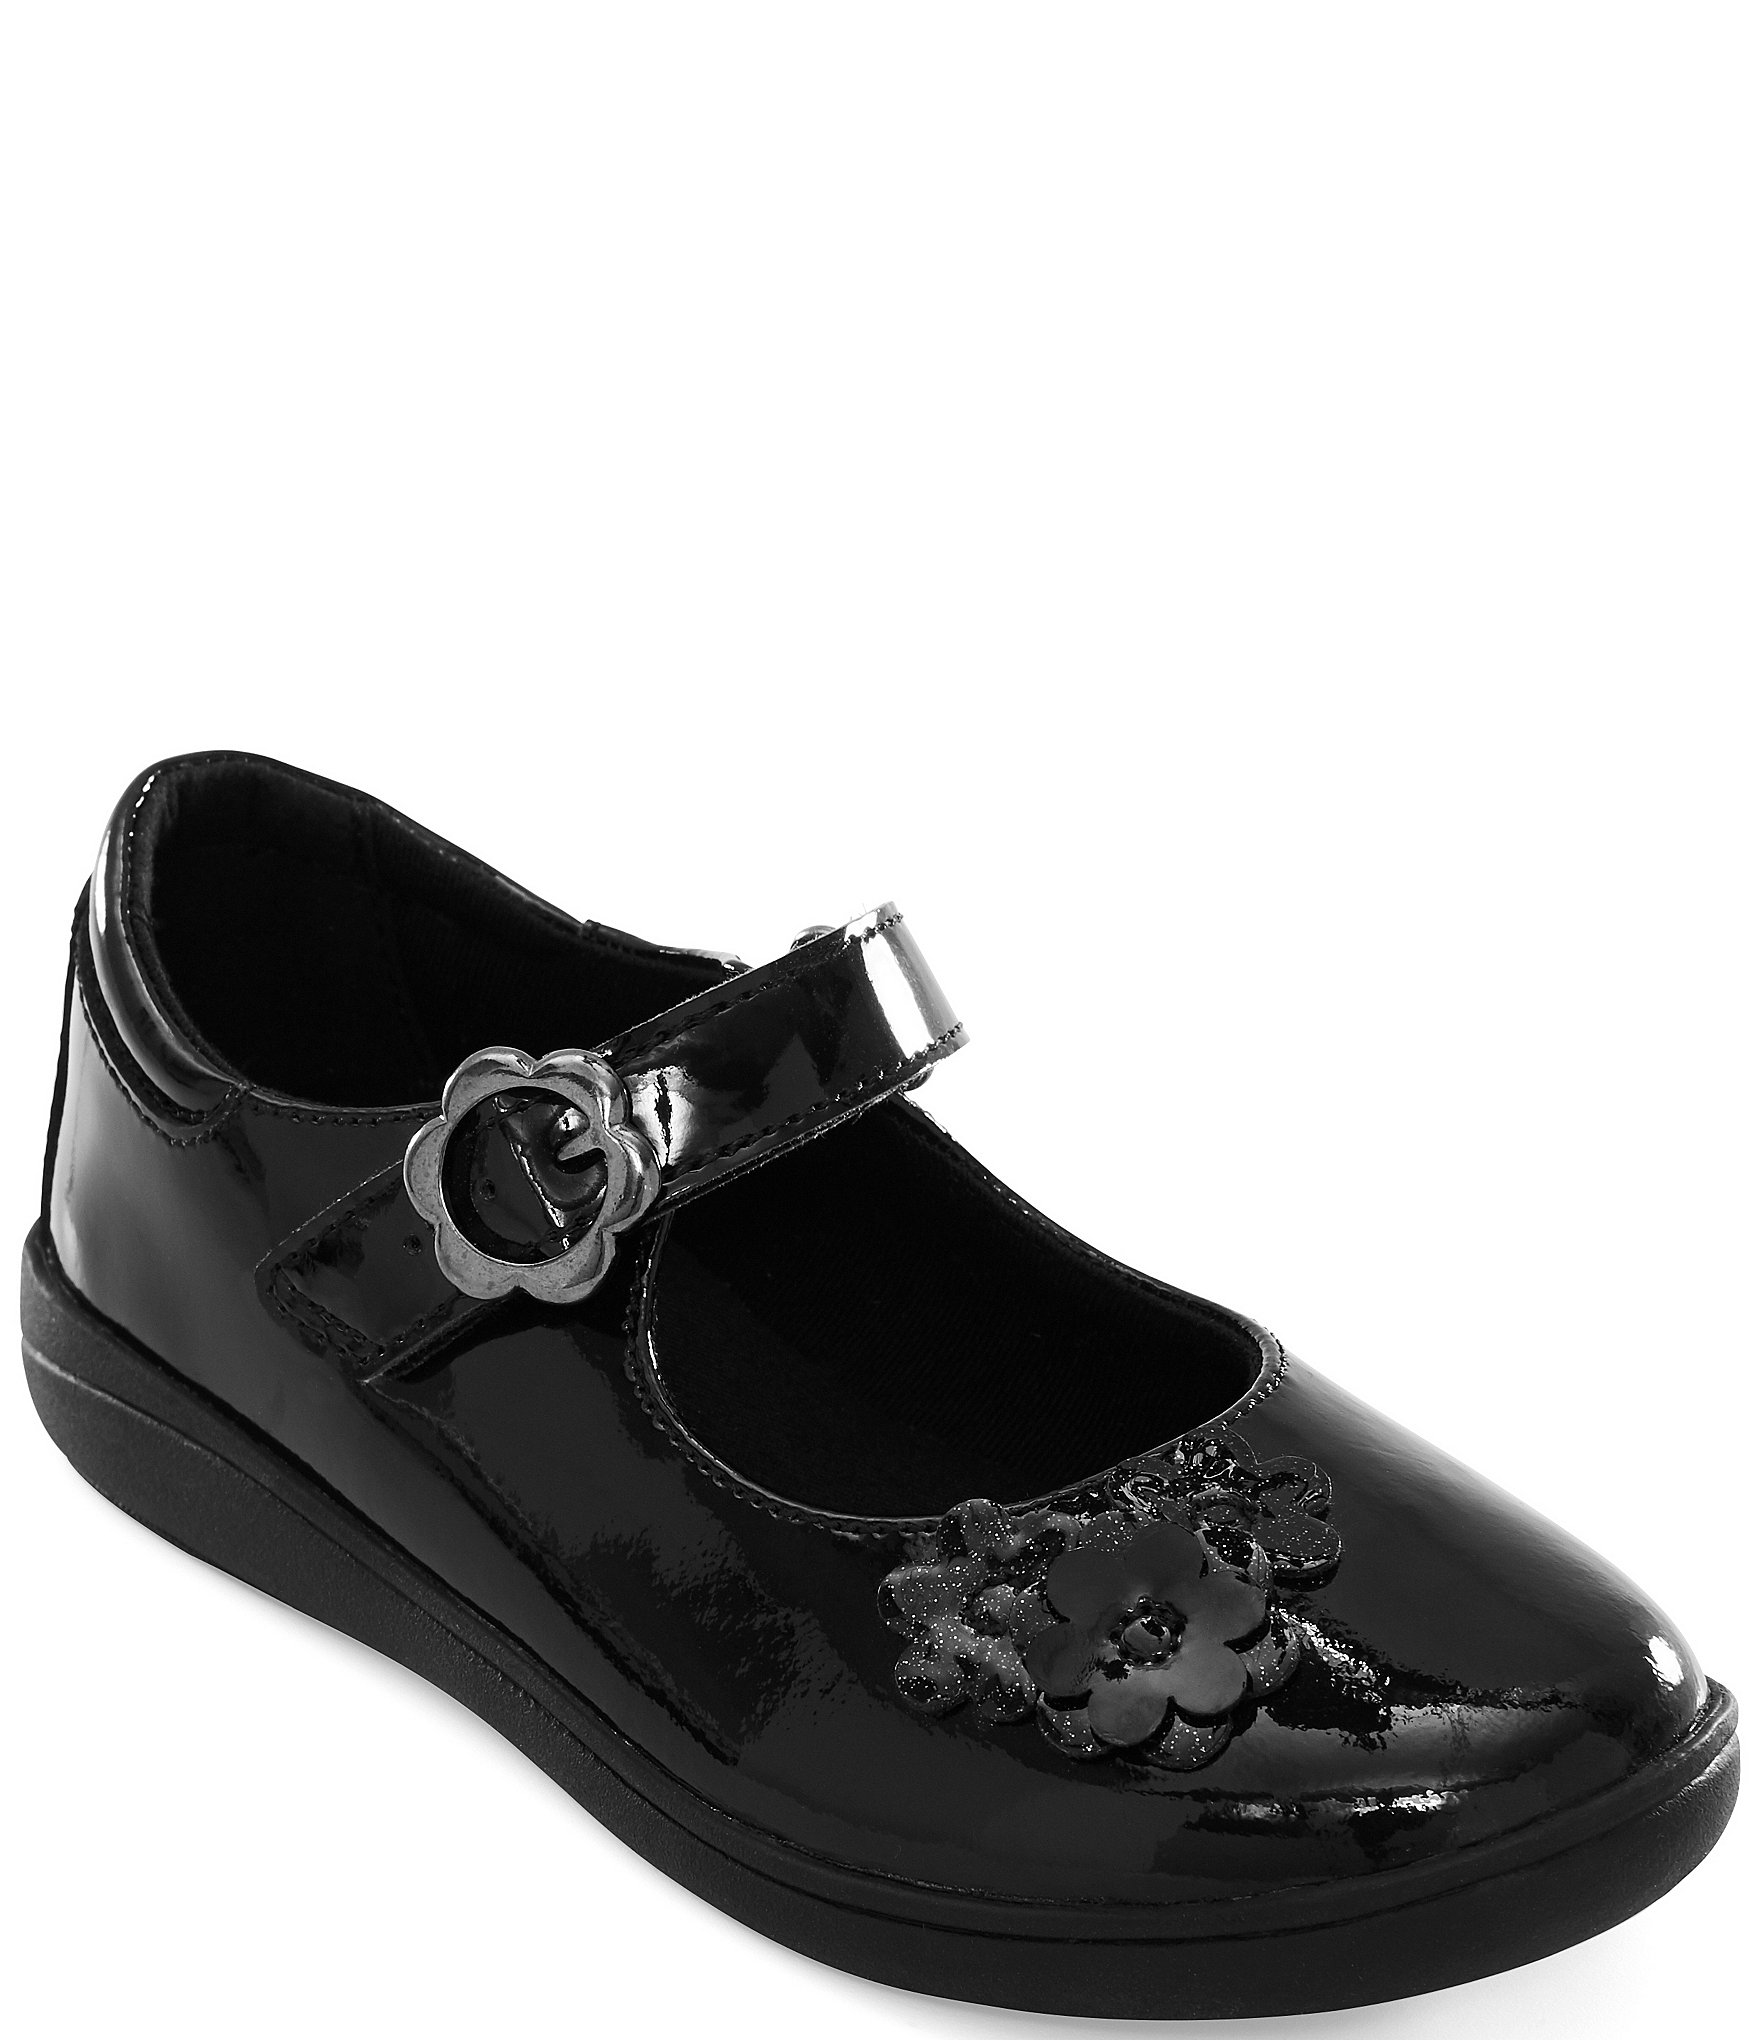 Noel Kids Girl's Jool V School Shoes Black Patent Real Leather Lace Up Brogues 